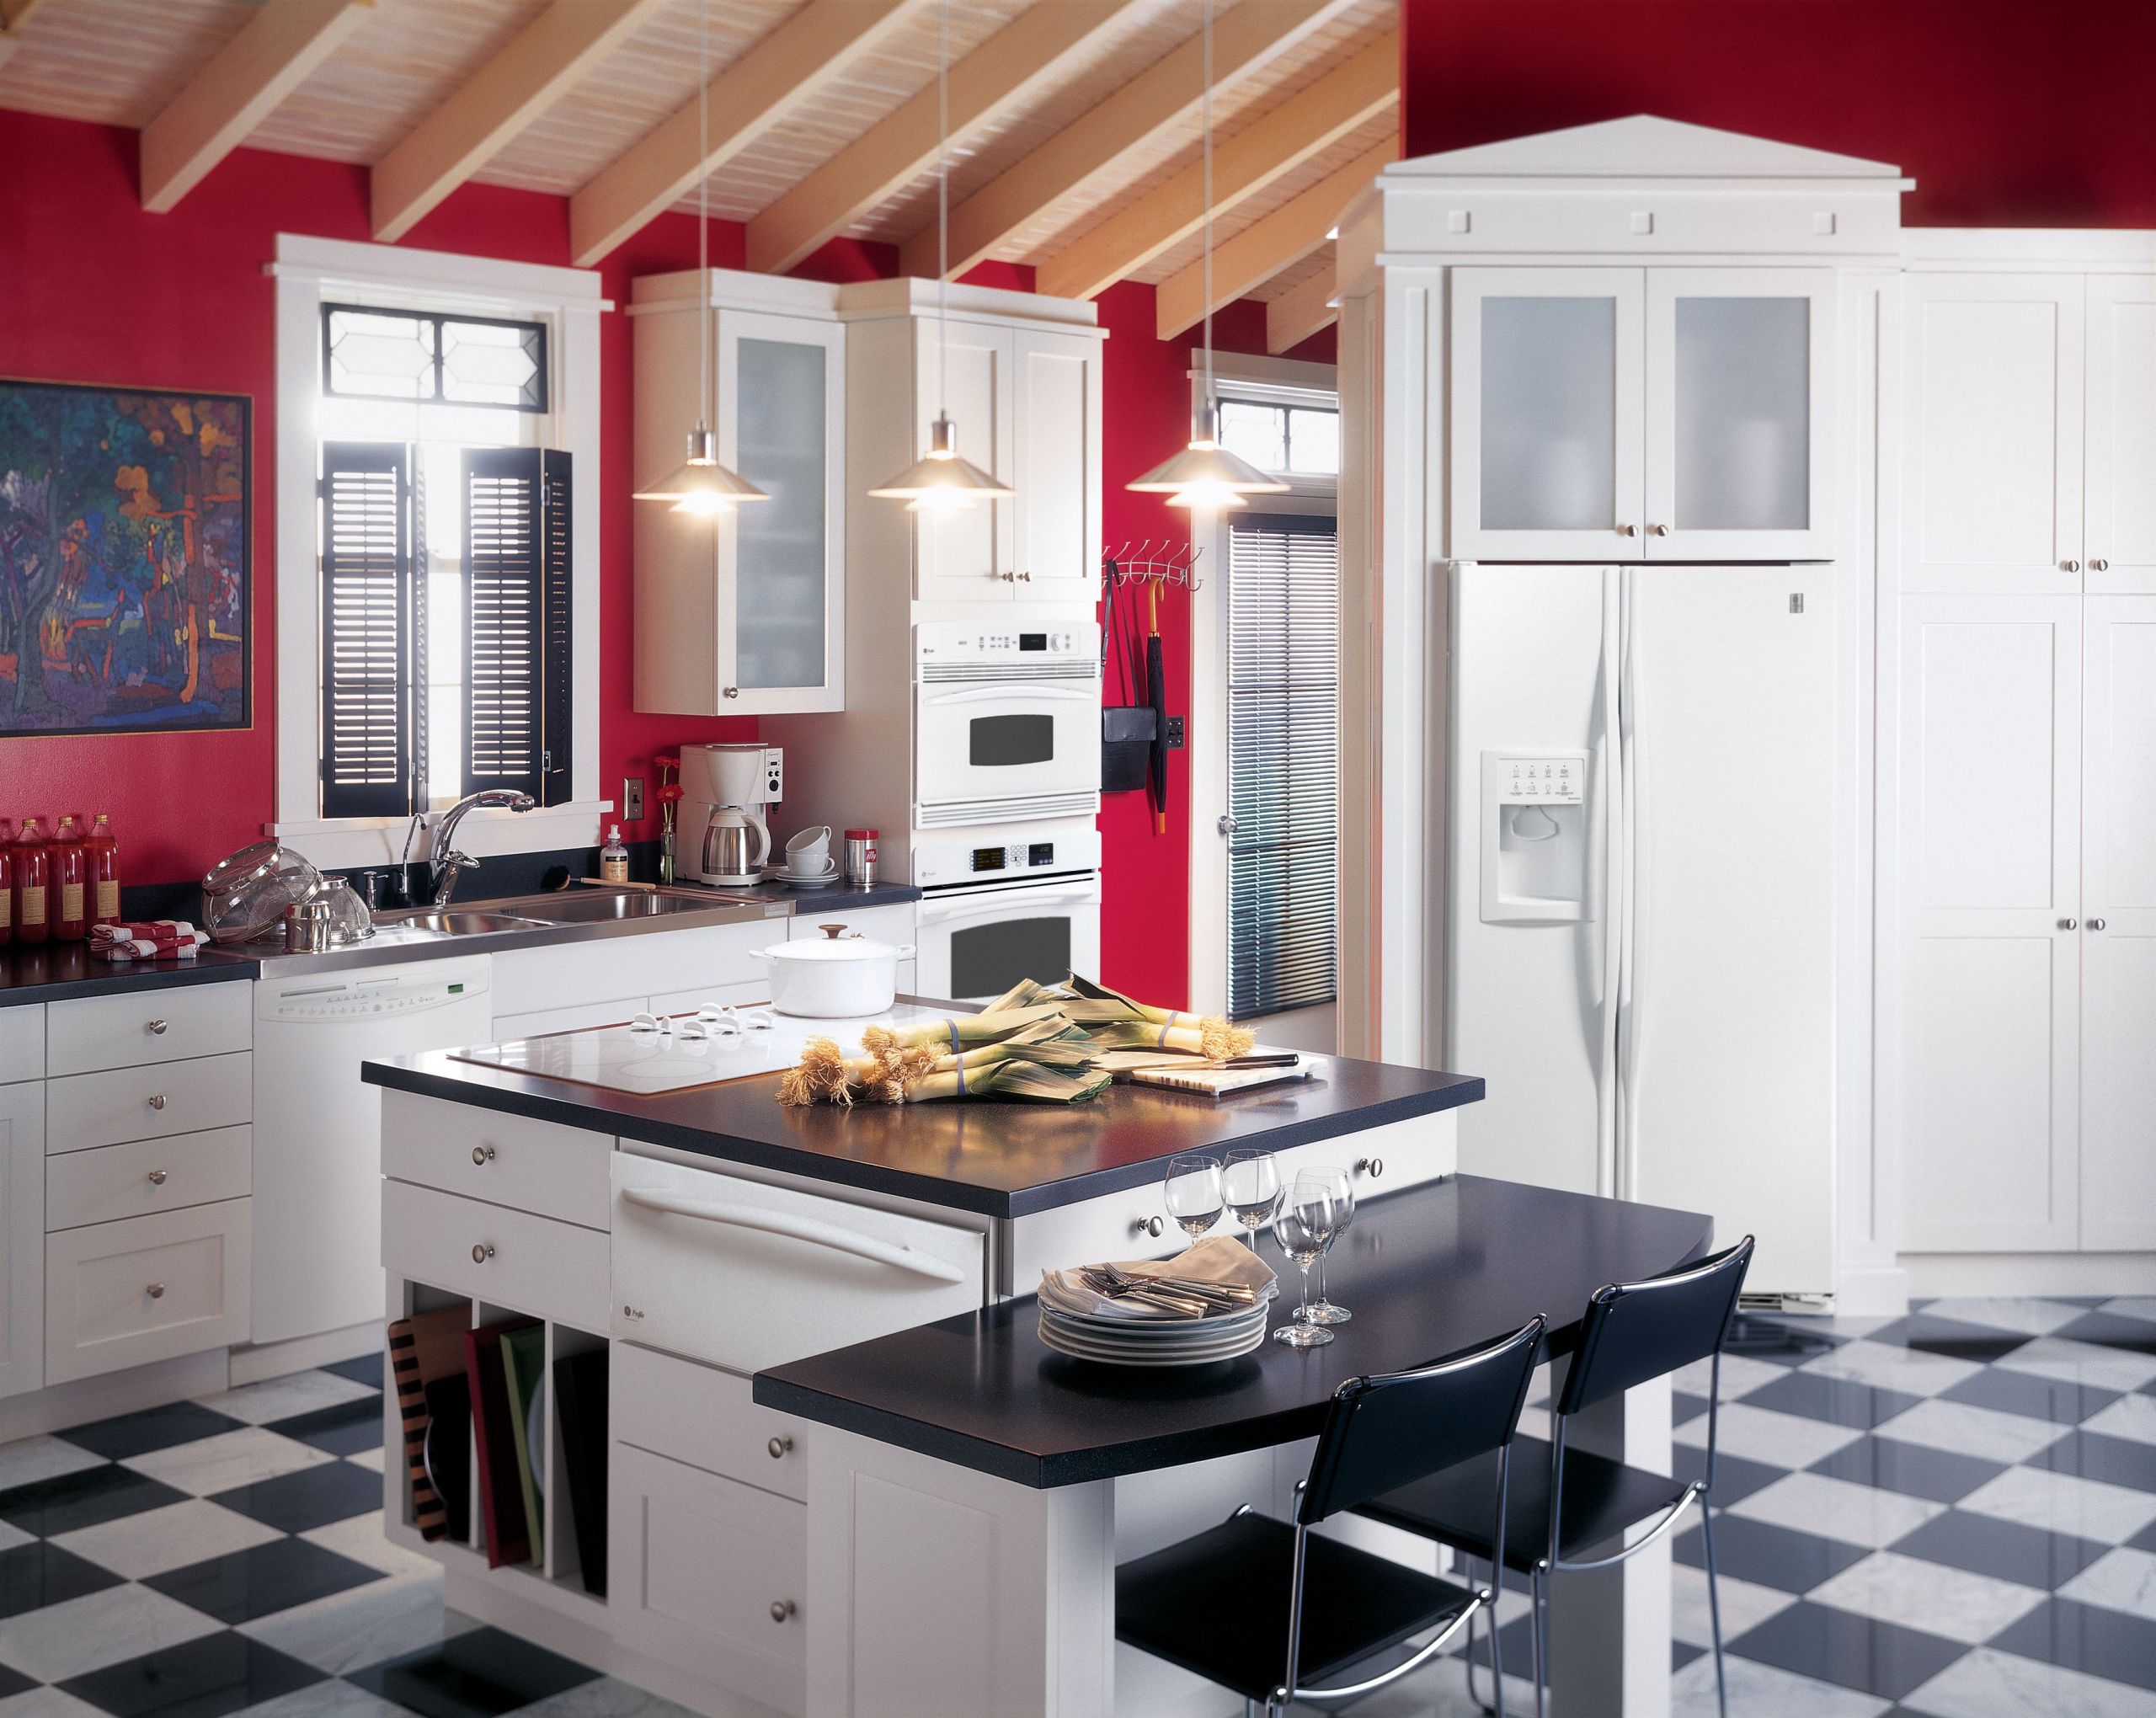 Kitchen With Red Wall
 GE Profile kitchen with red walls white cabinets and